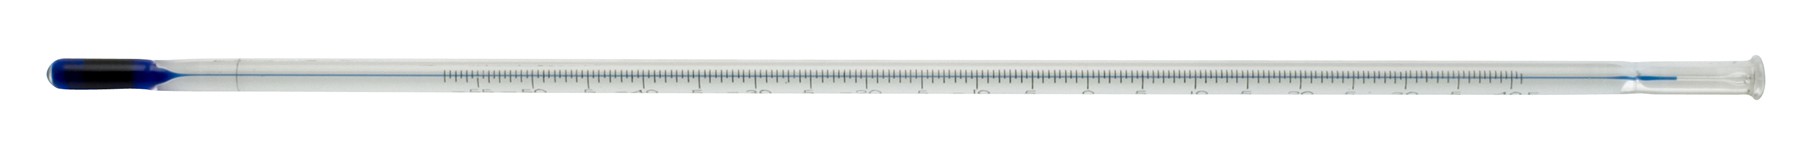 H-B DURAC Plus ASTM Like Liquid-In-Glass Thermometer; 15F / Low Softening Point, Total Immersion, 32 to 180F, Organic Liquid Fill